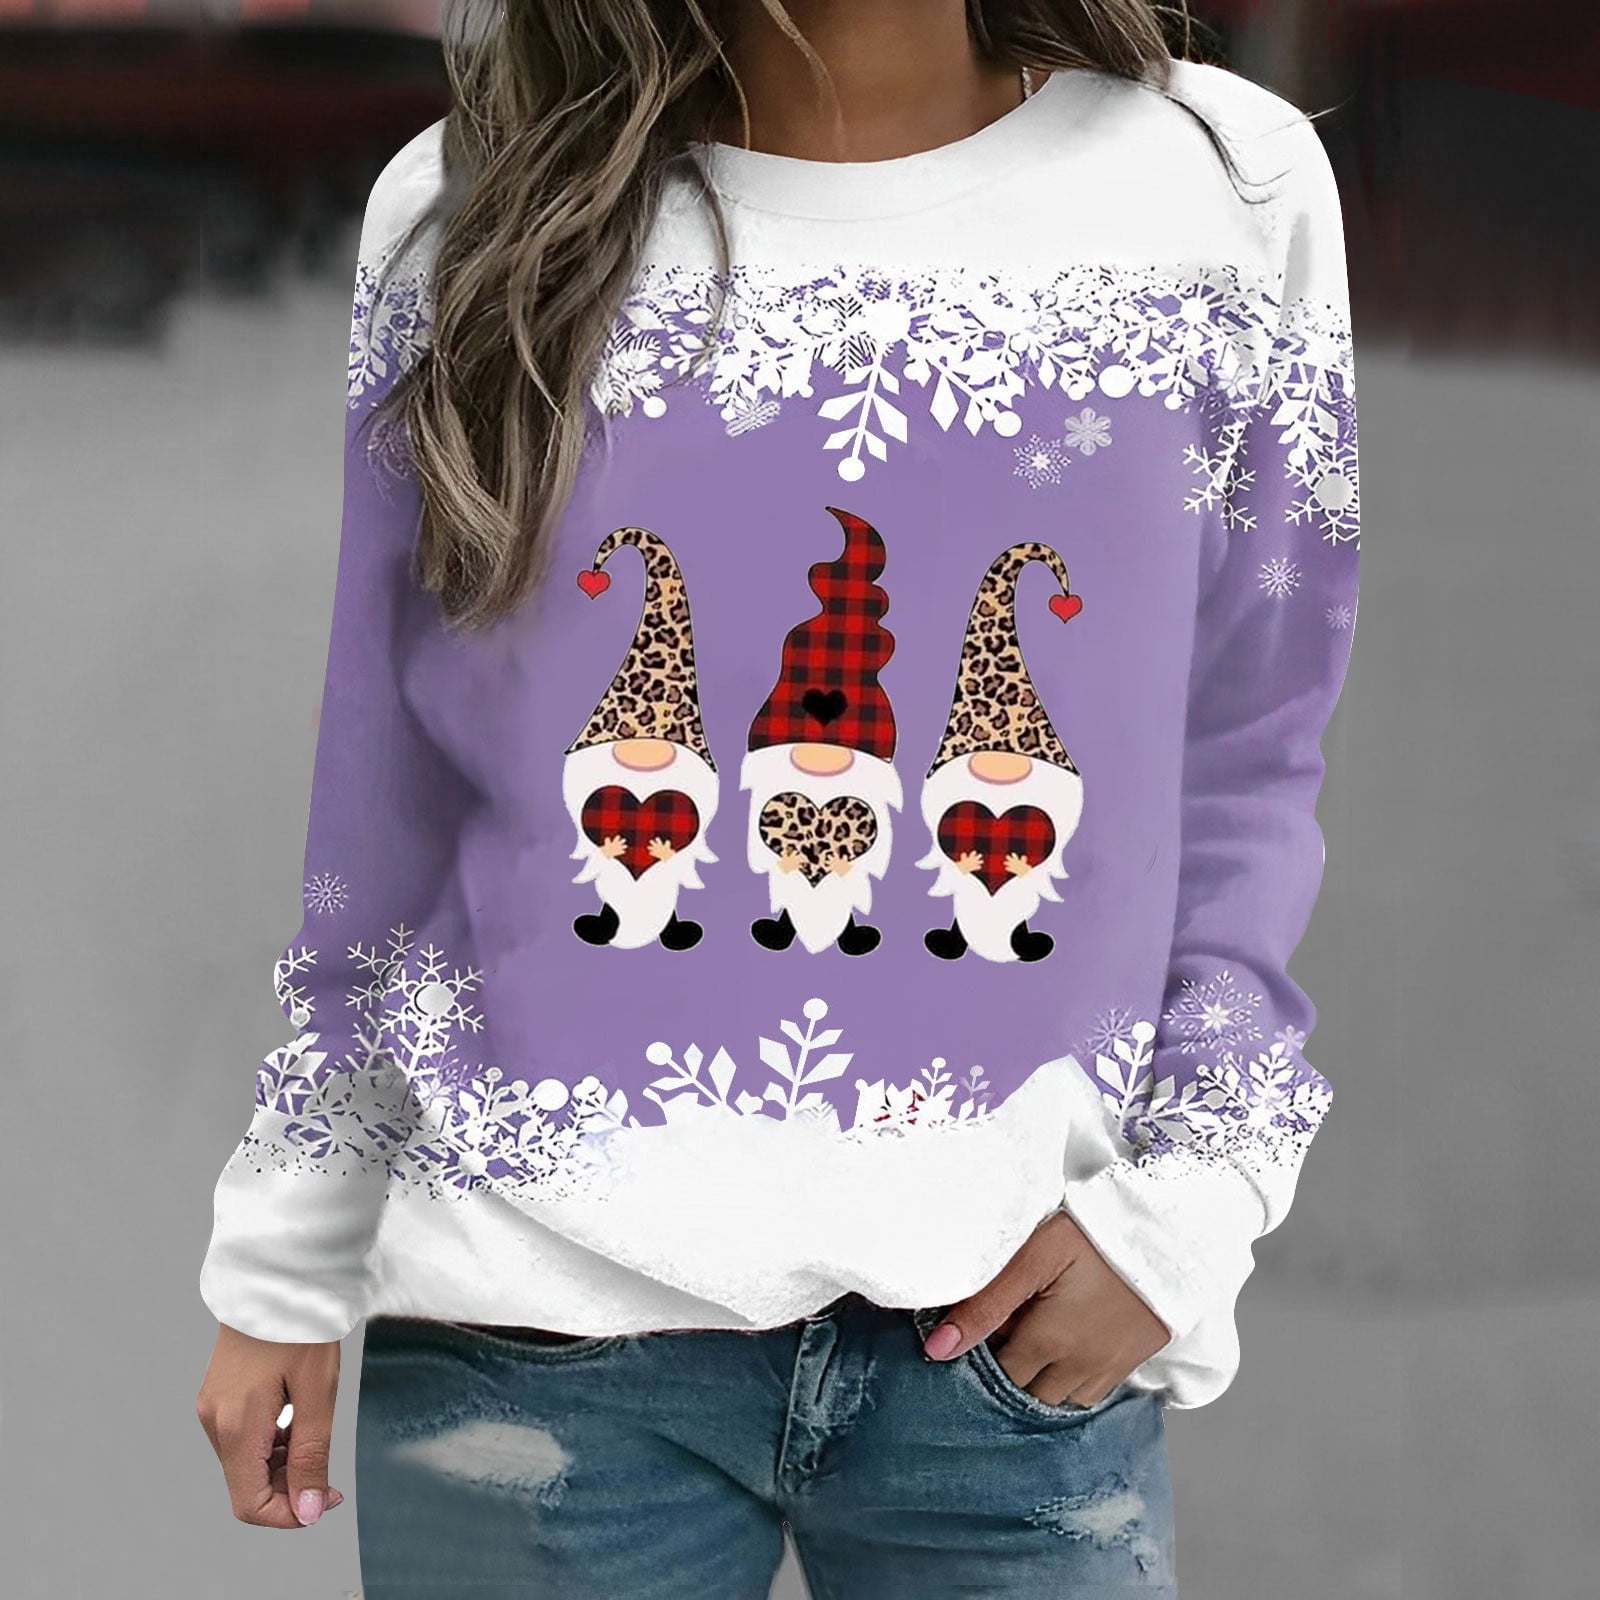 Dyegold Ugly Christmas Sweatshirt Women Weekly Deals Ladies Casual Xmas  Gnomes Sweatshirt Plus Size Funny Merry Christmas Tops Cute Teen Girls  Crewneck Sweater Novelty Shirts Graphic Pullover 